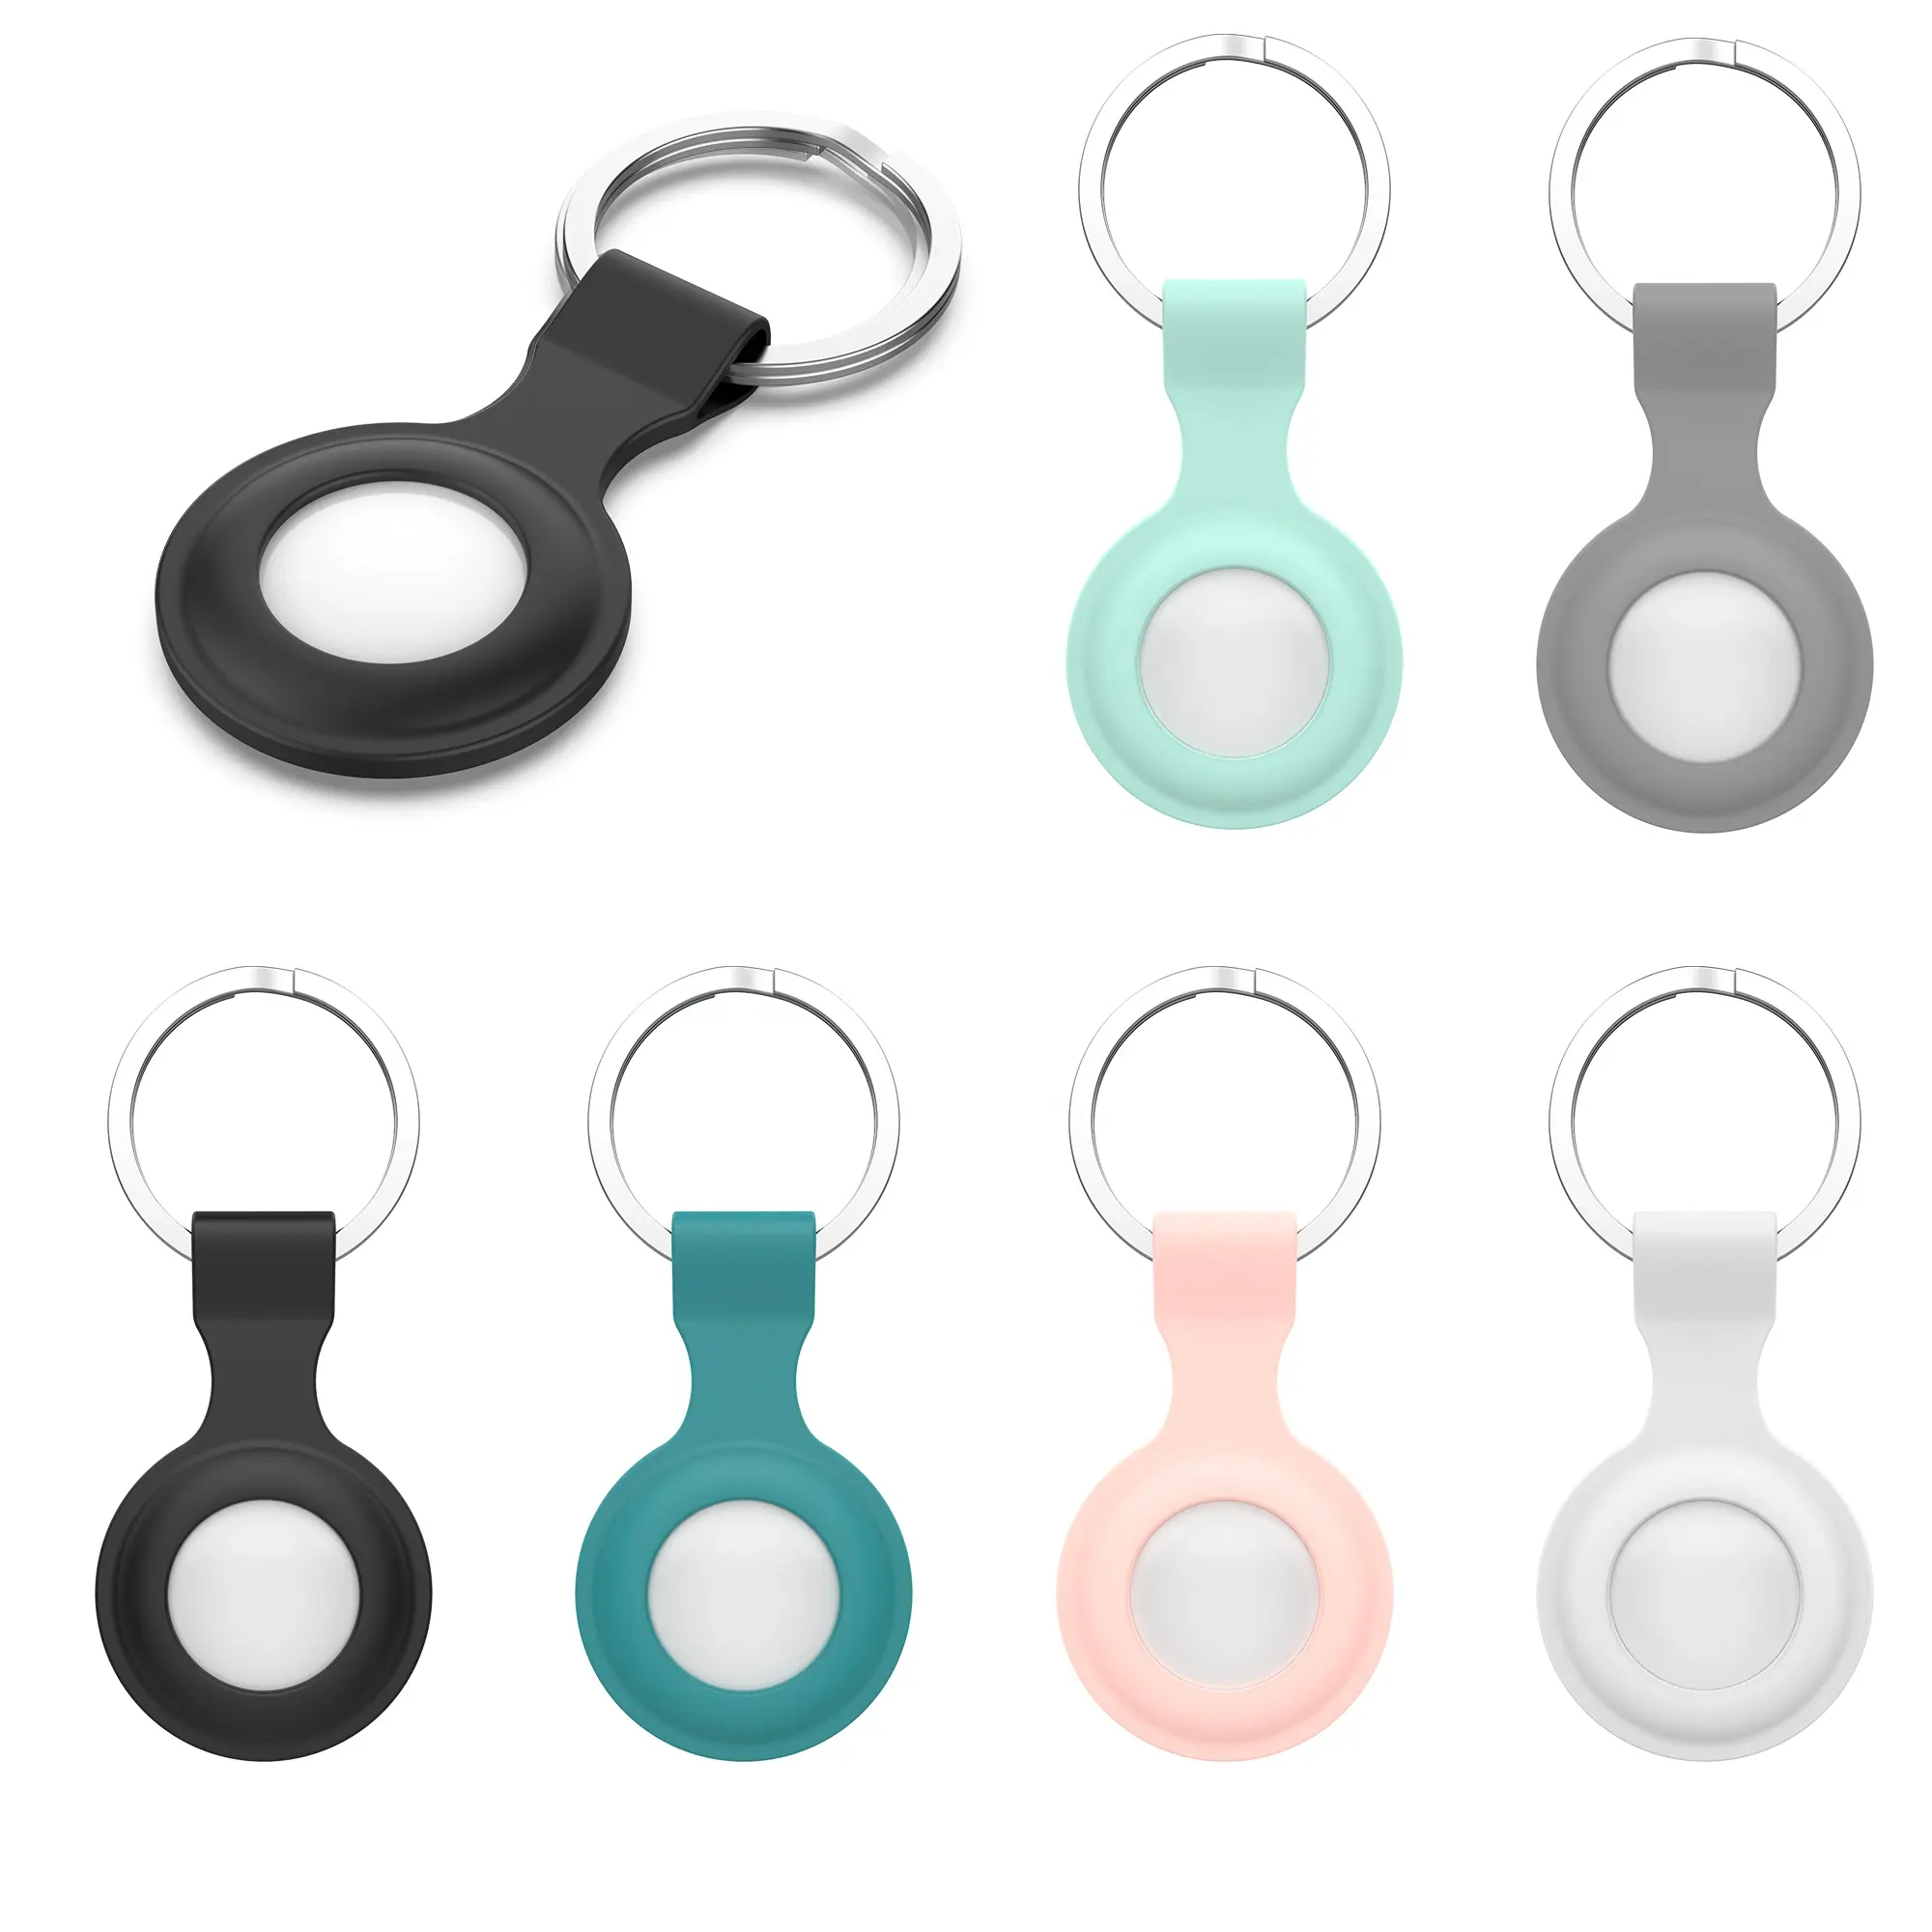 2021 New Shock-proof Locator Tracker Key Chain Rubber Protective Cover for Apple Airtags Silicone case